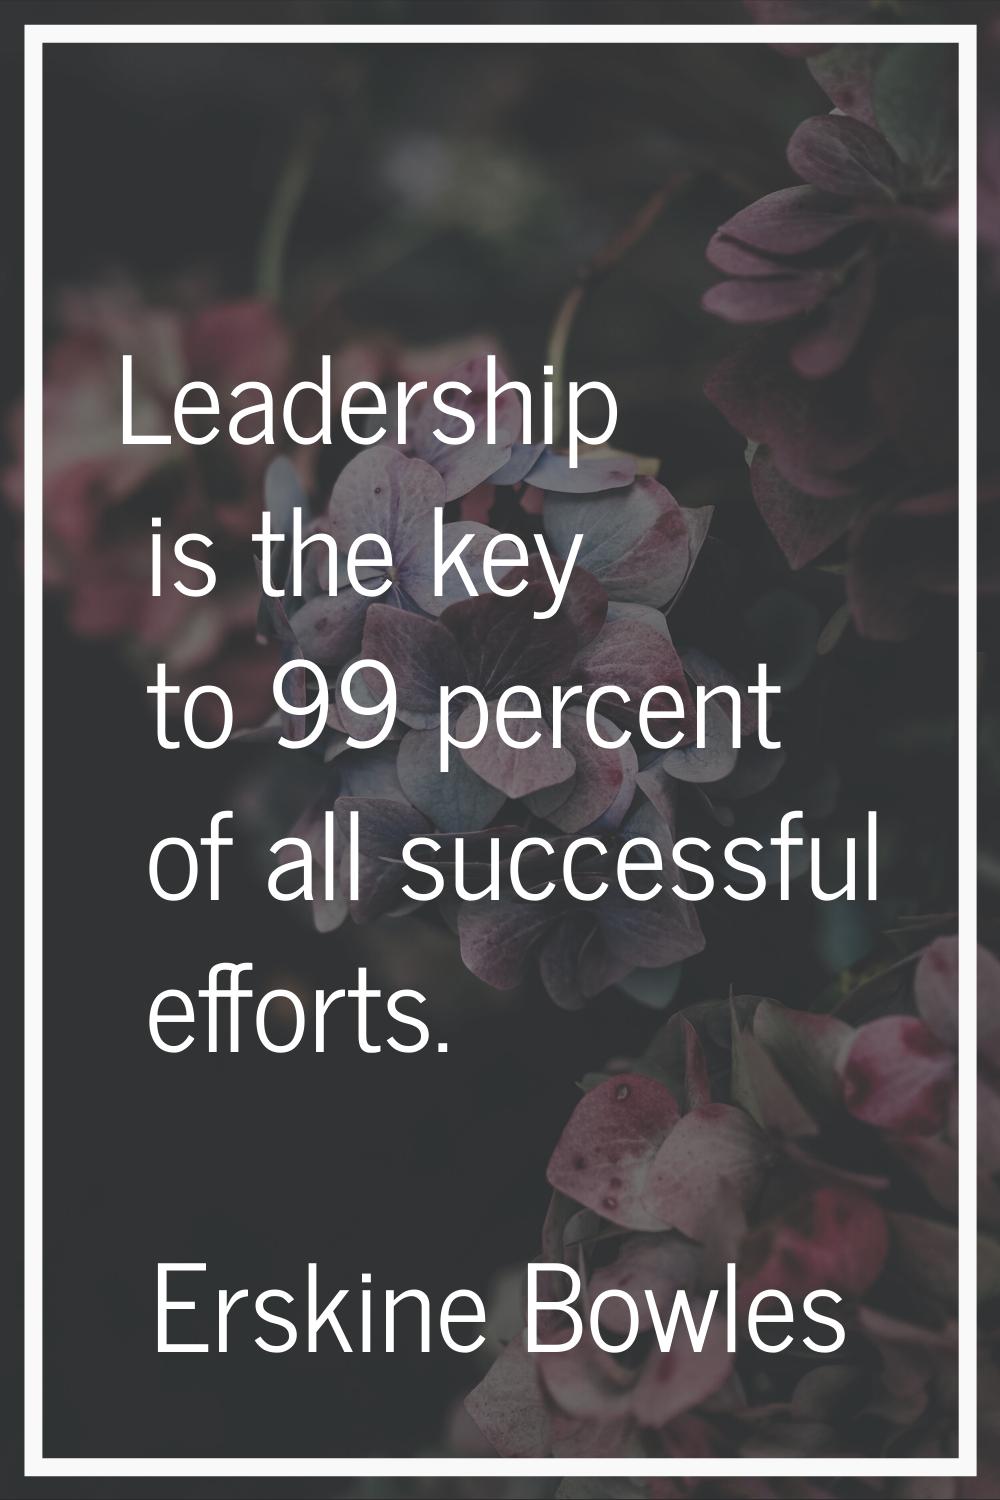 Leadership is the key to 99 percent of all successful efforts.